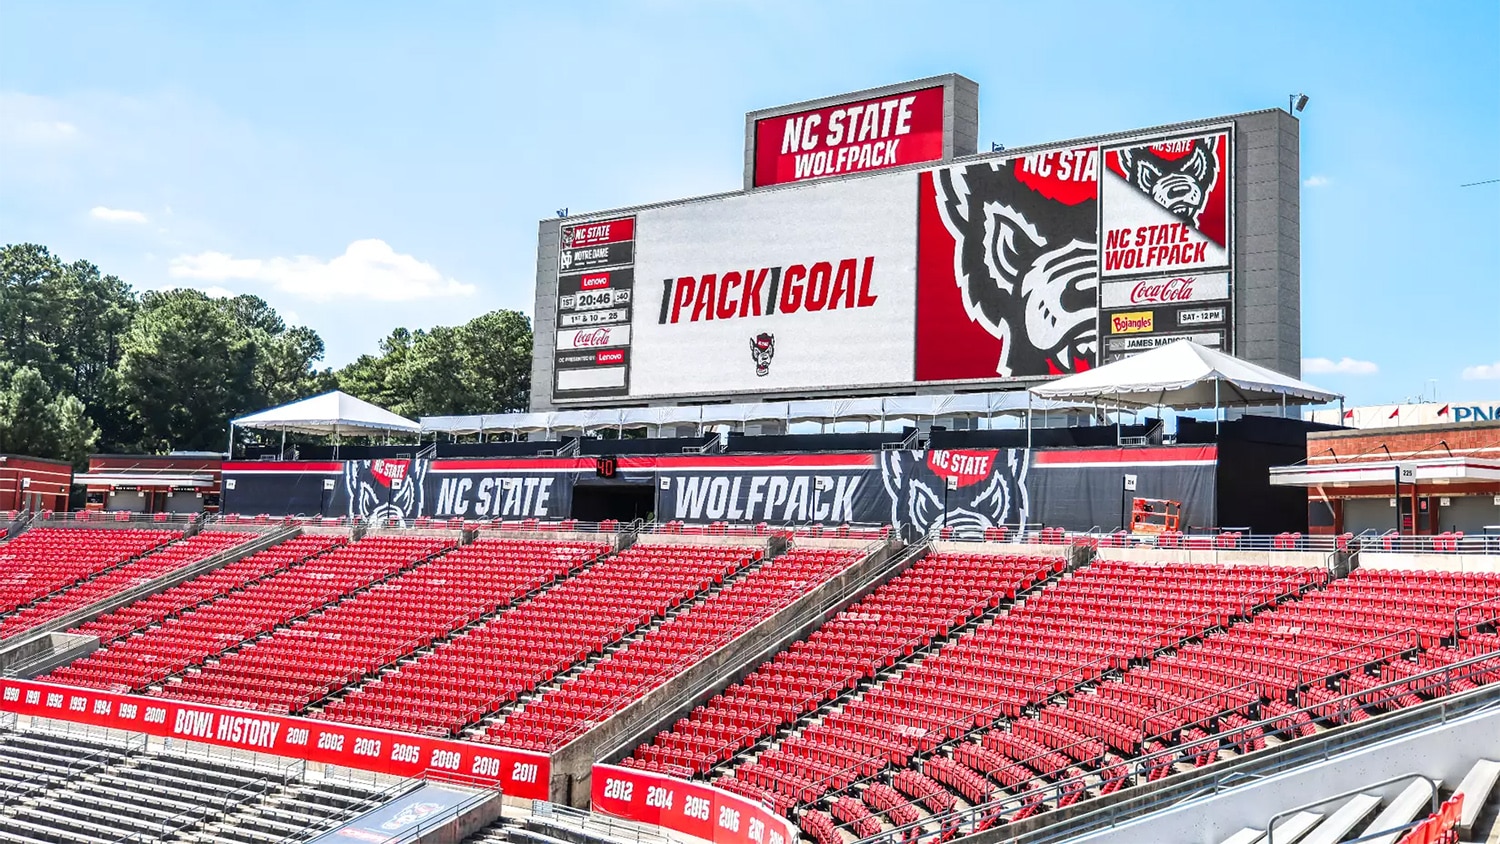 The giant new scoreboard at Carter-Finley Stadium